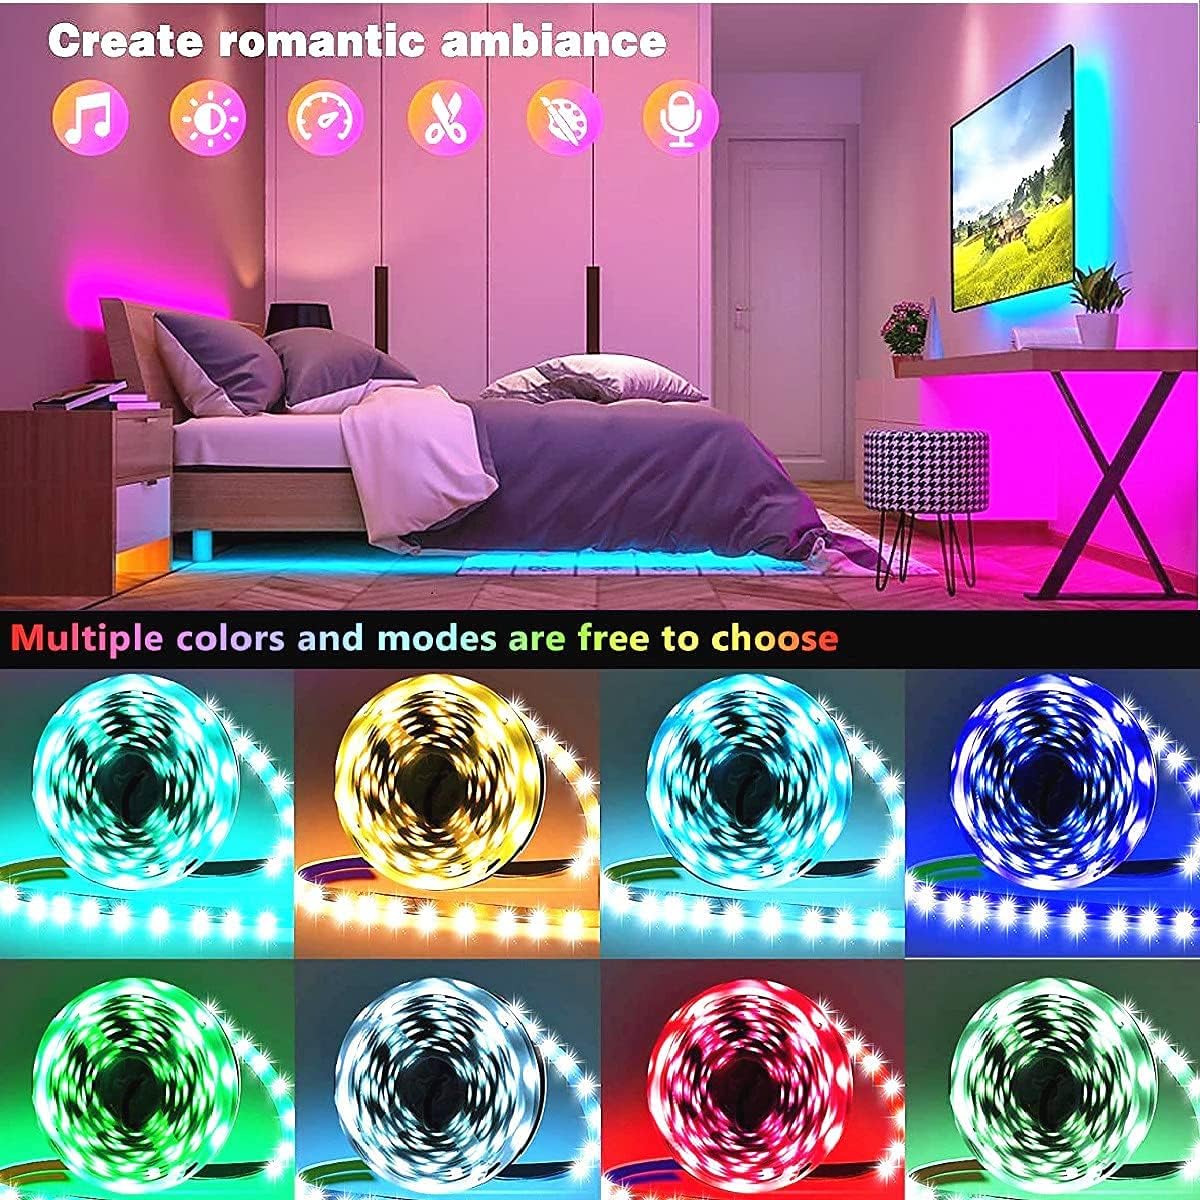 LED Lights Music Sync RGB LED Strip Lights with Remote Control, Bluetooth LED Lights for Home Bar Decoration (100Ft)